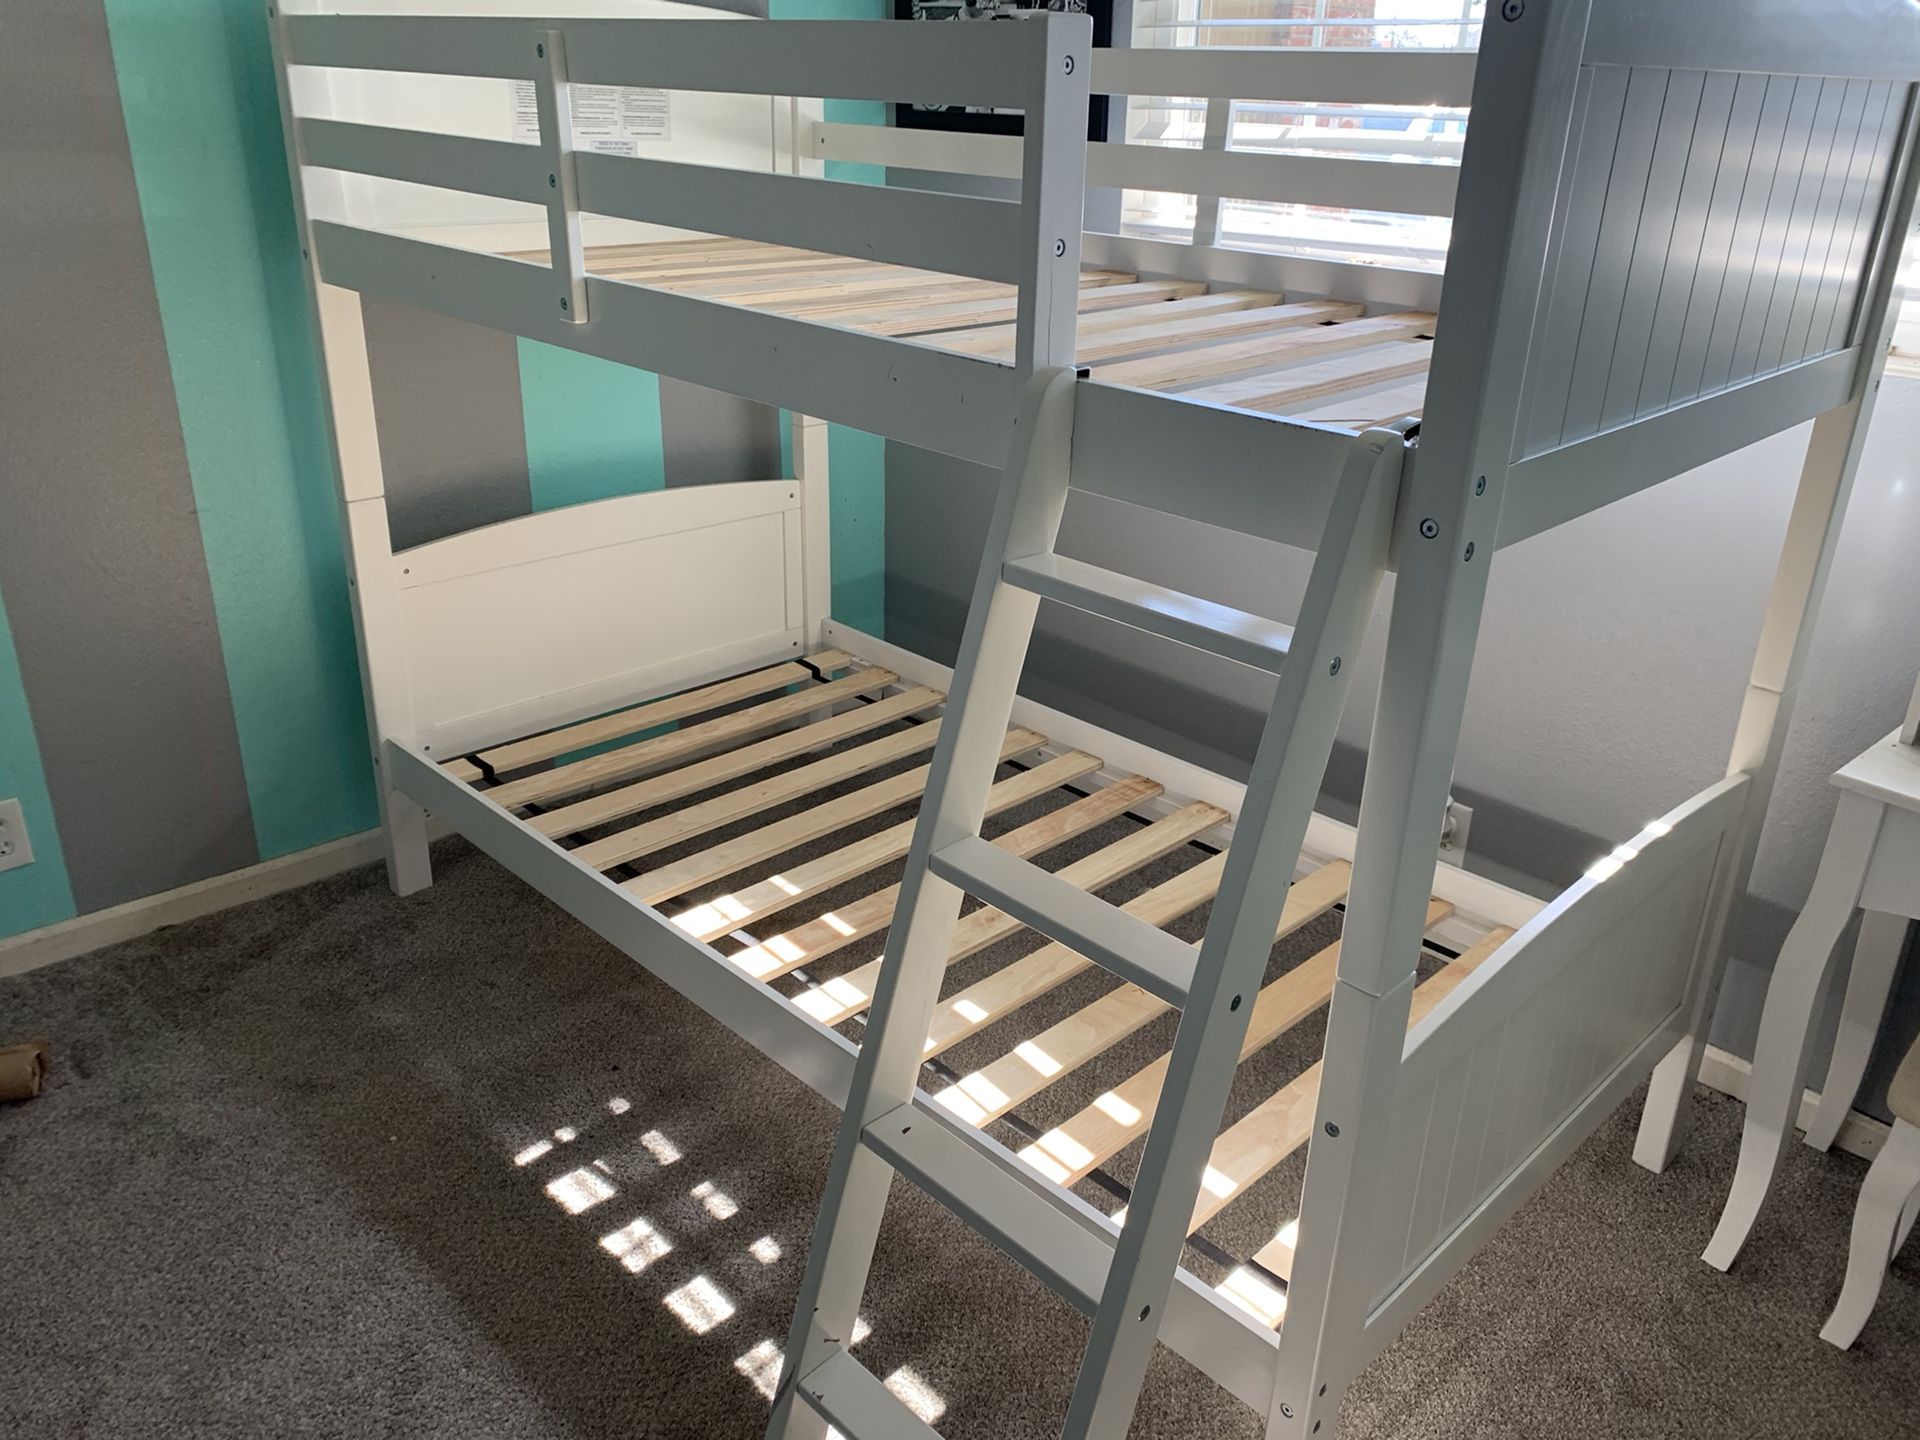 Ashley Twin size bunk beds